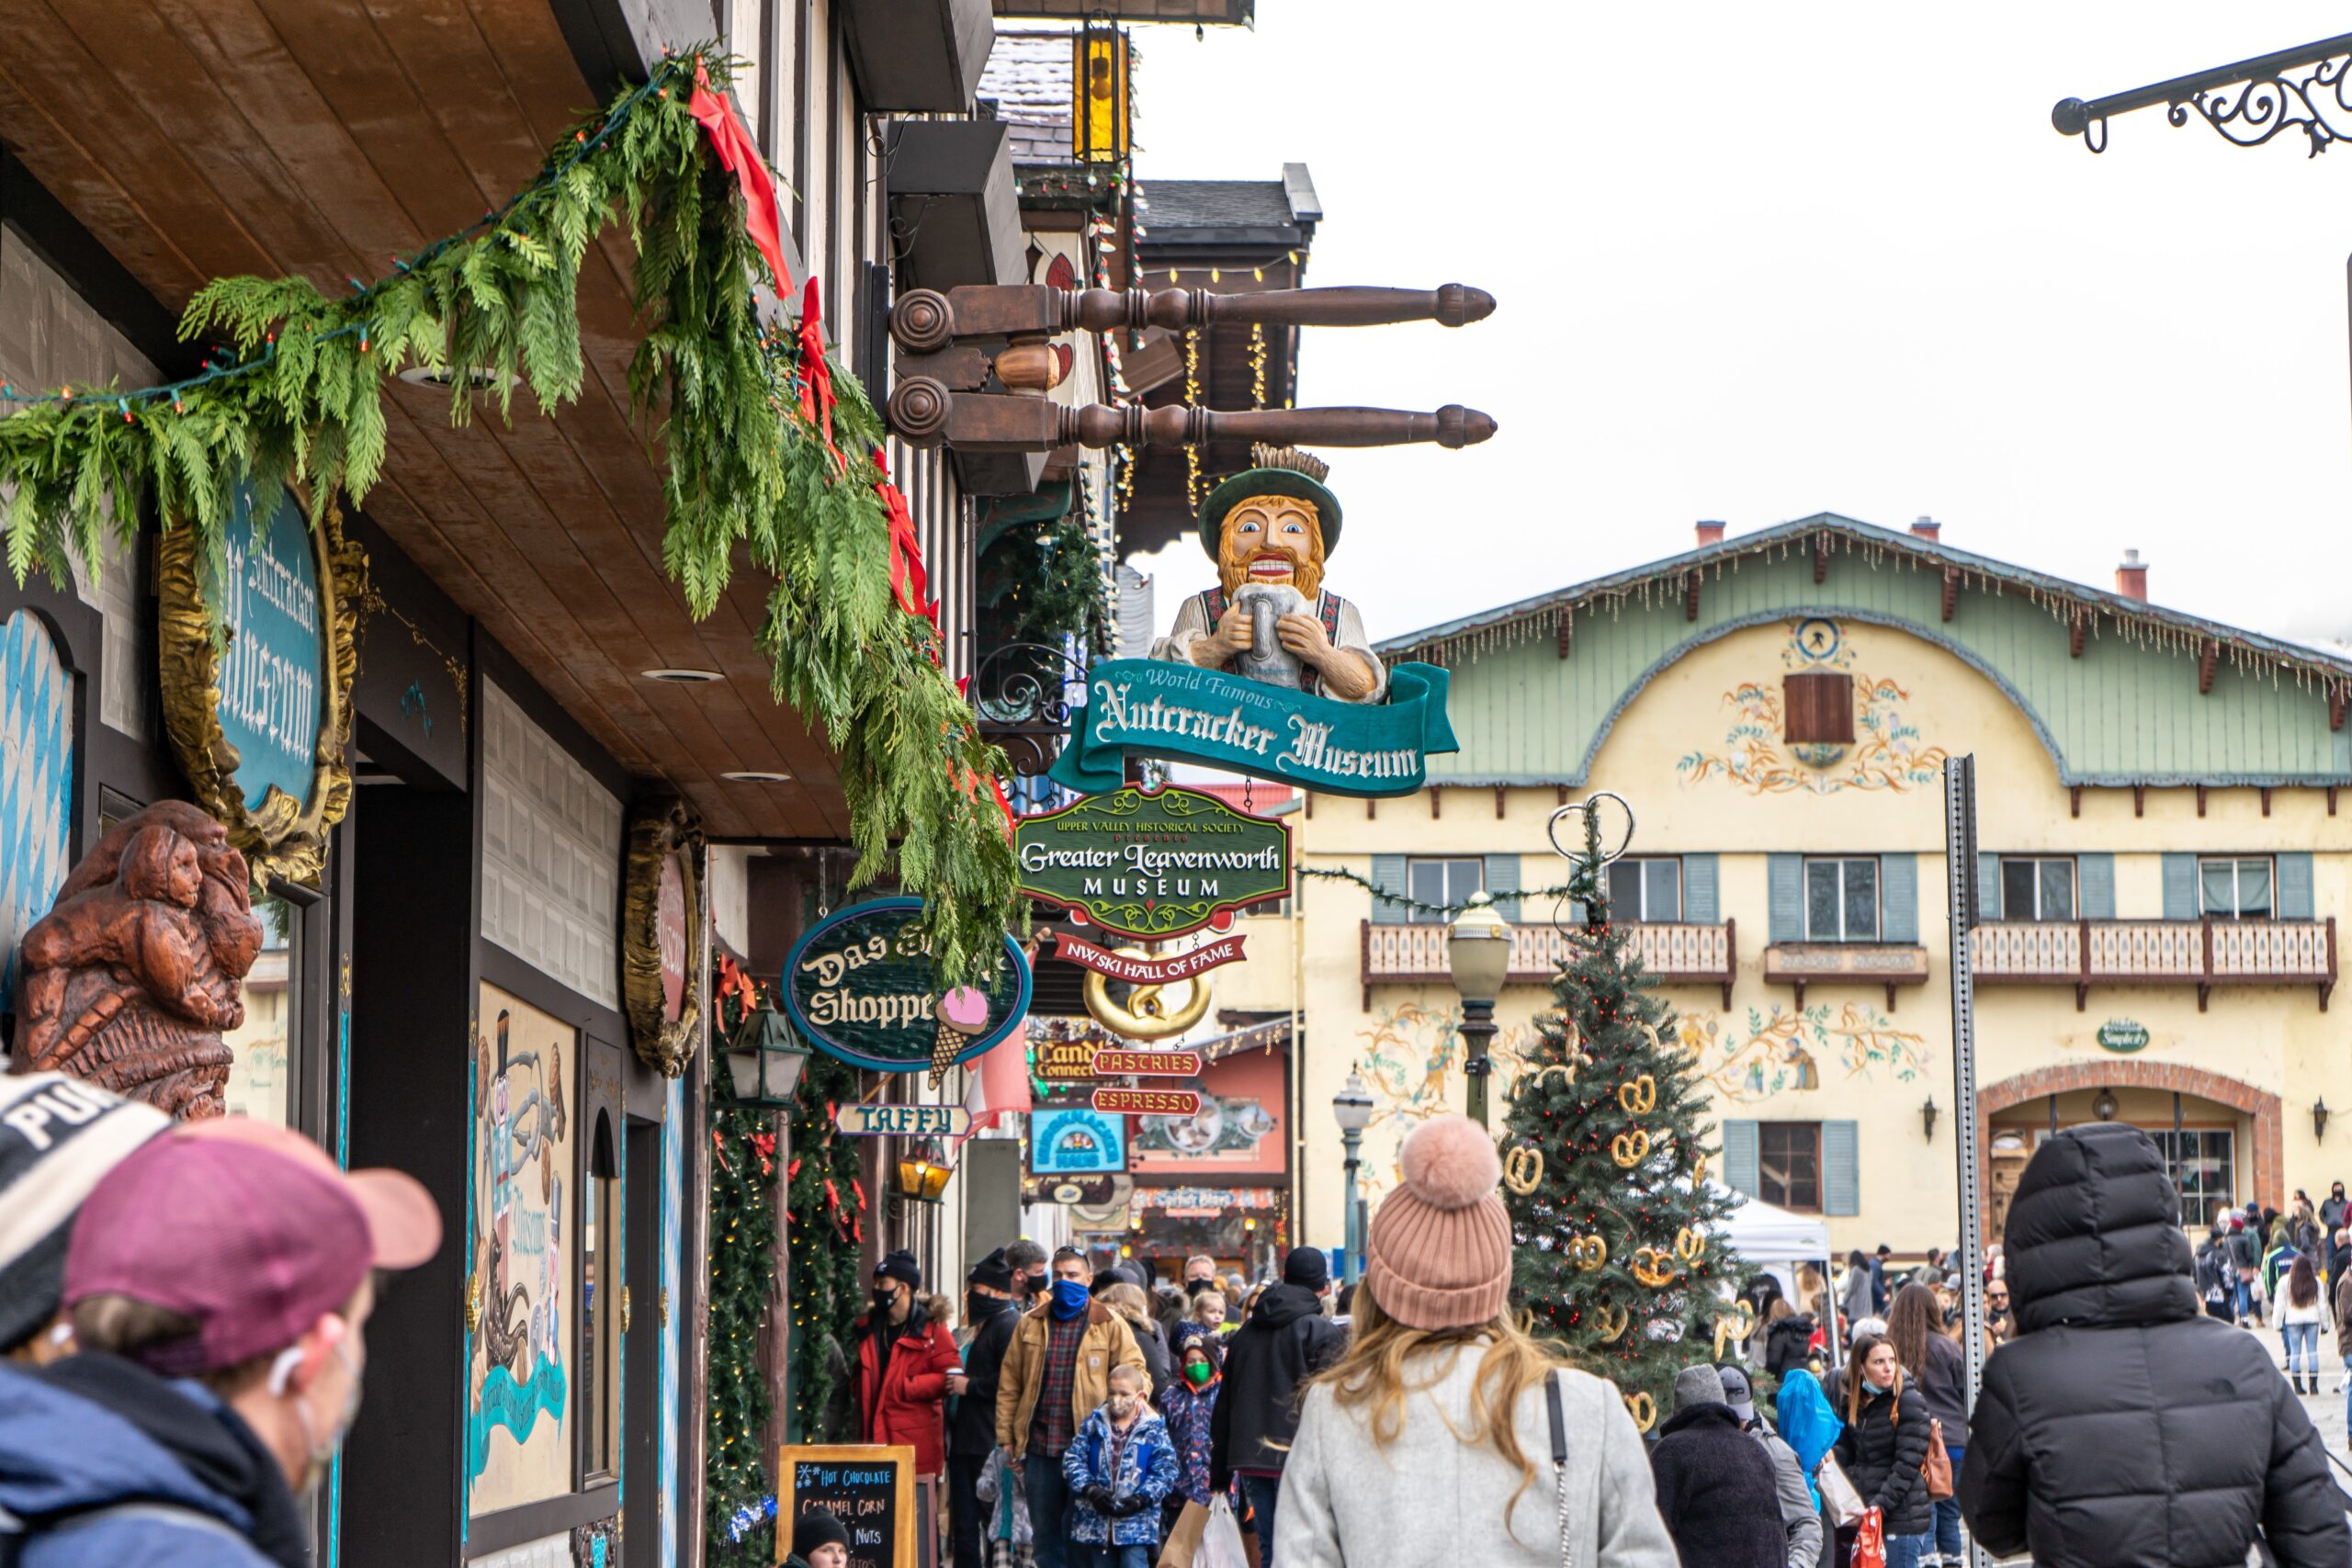 Leavenworth has many festive events and pretty decor throughout the Christmas season. 
pictured: the streets of Leavenworth filled with people during the Christmas market